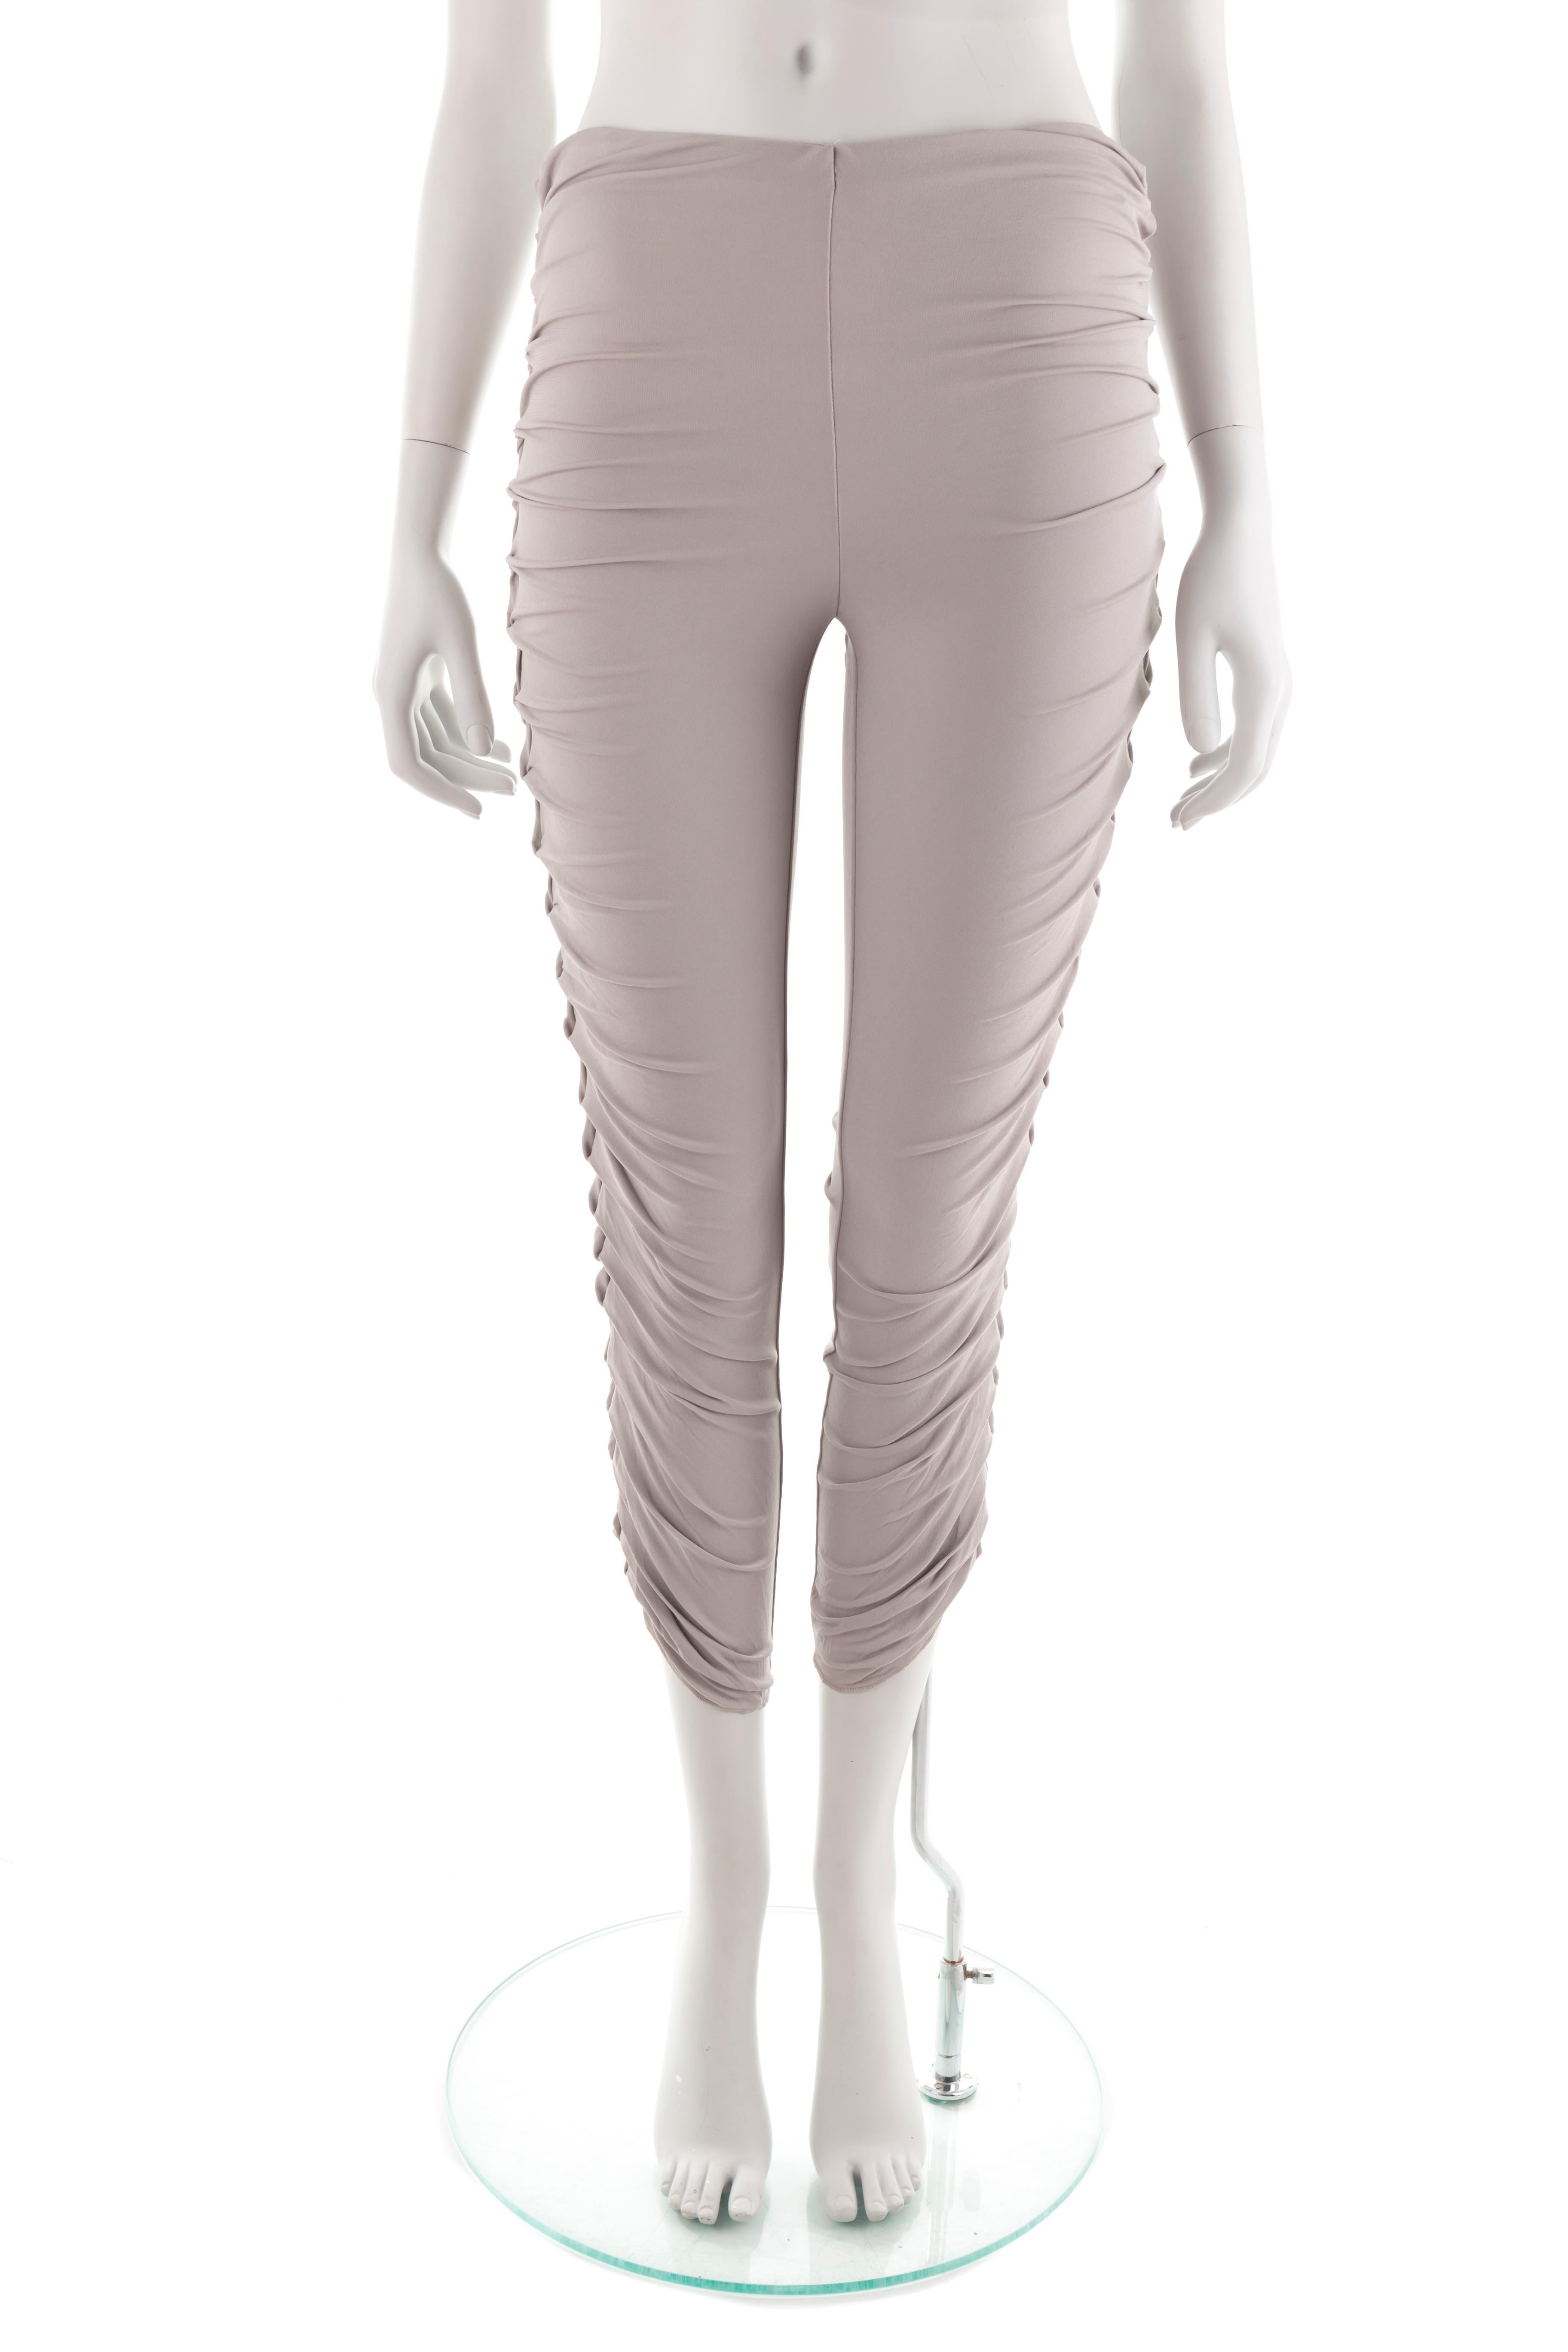 - Giorgio Armani jersey leggings
- Sold by Gold Palms Vintage
- Spring/Summer 2003
- High-waist
- Ruched legs
- Size IT 40 / US 6

Measurements:

Waistline: 64 cm / 25.1 inch
Outseam: 85,5 cm / 33.6 inch